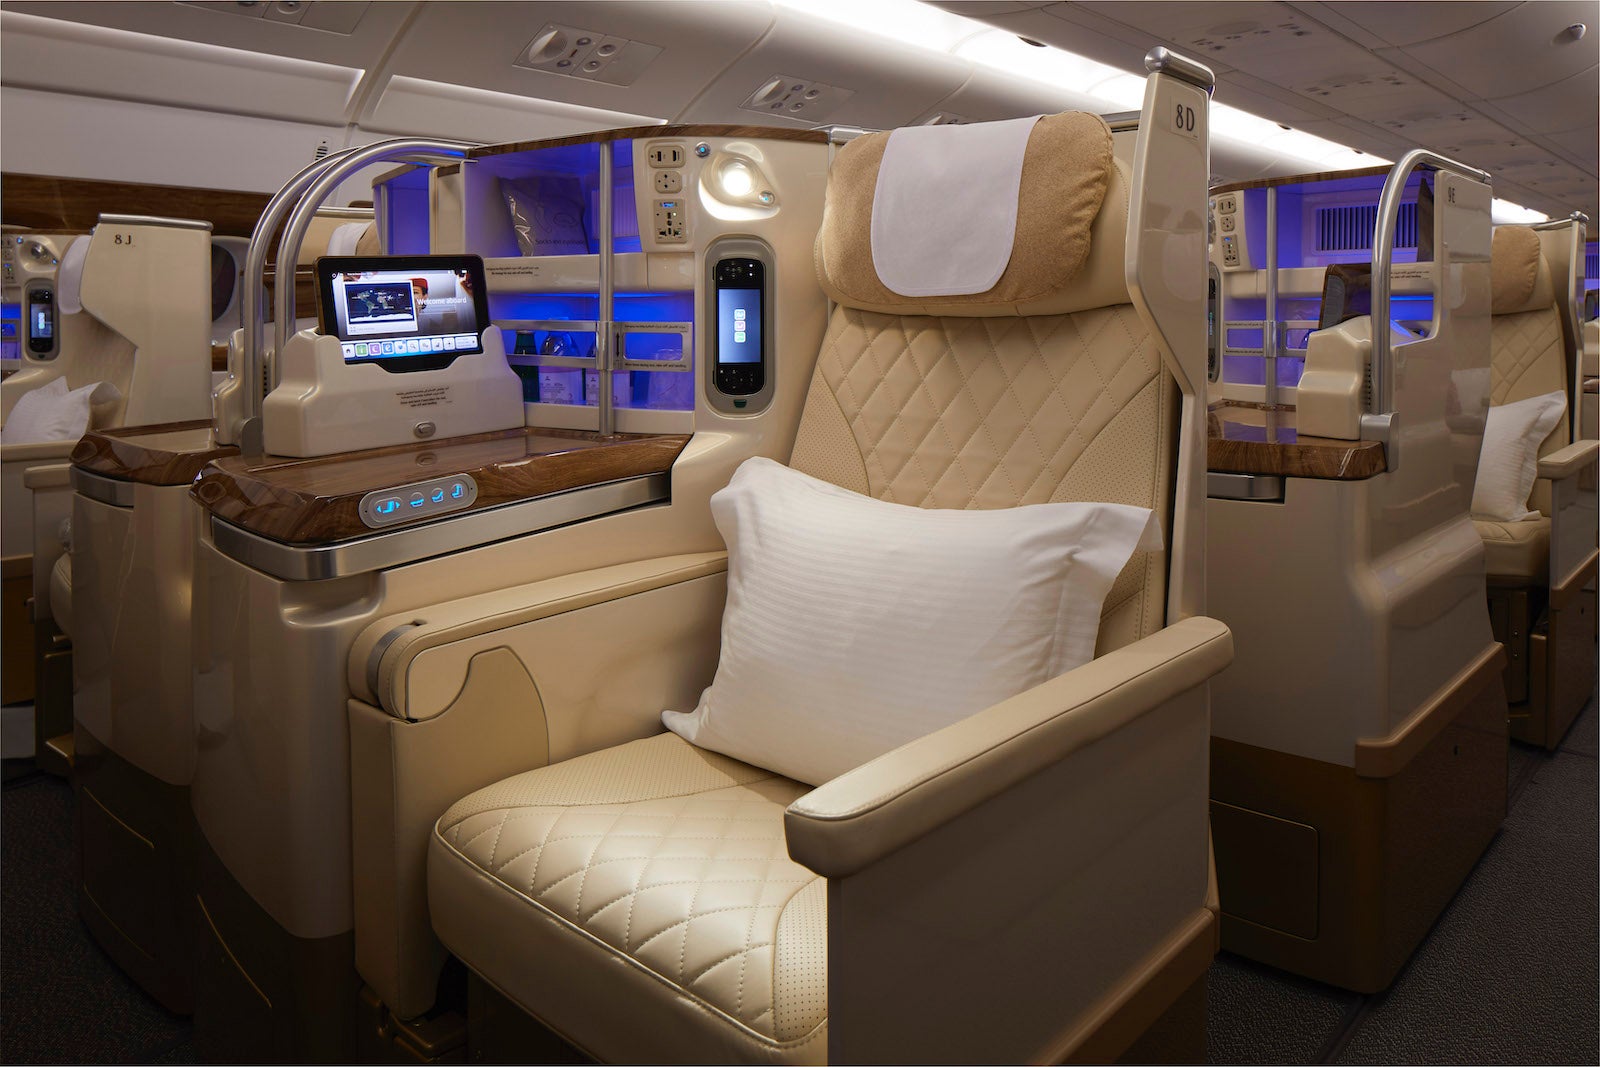 Book Emirates business class to Europe for 90,000 miles round-trip